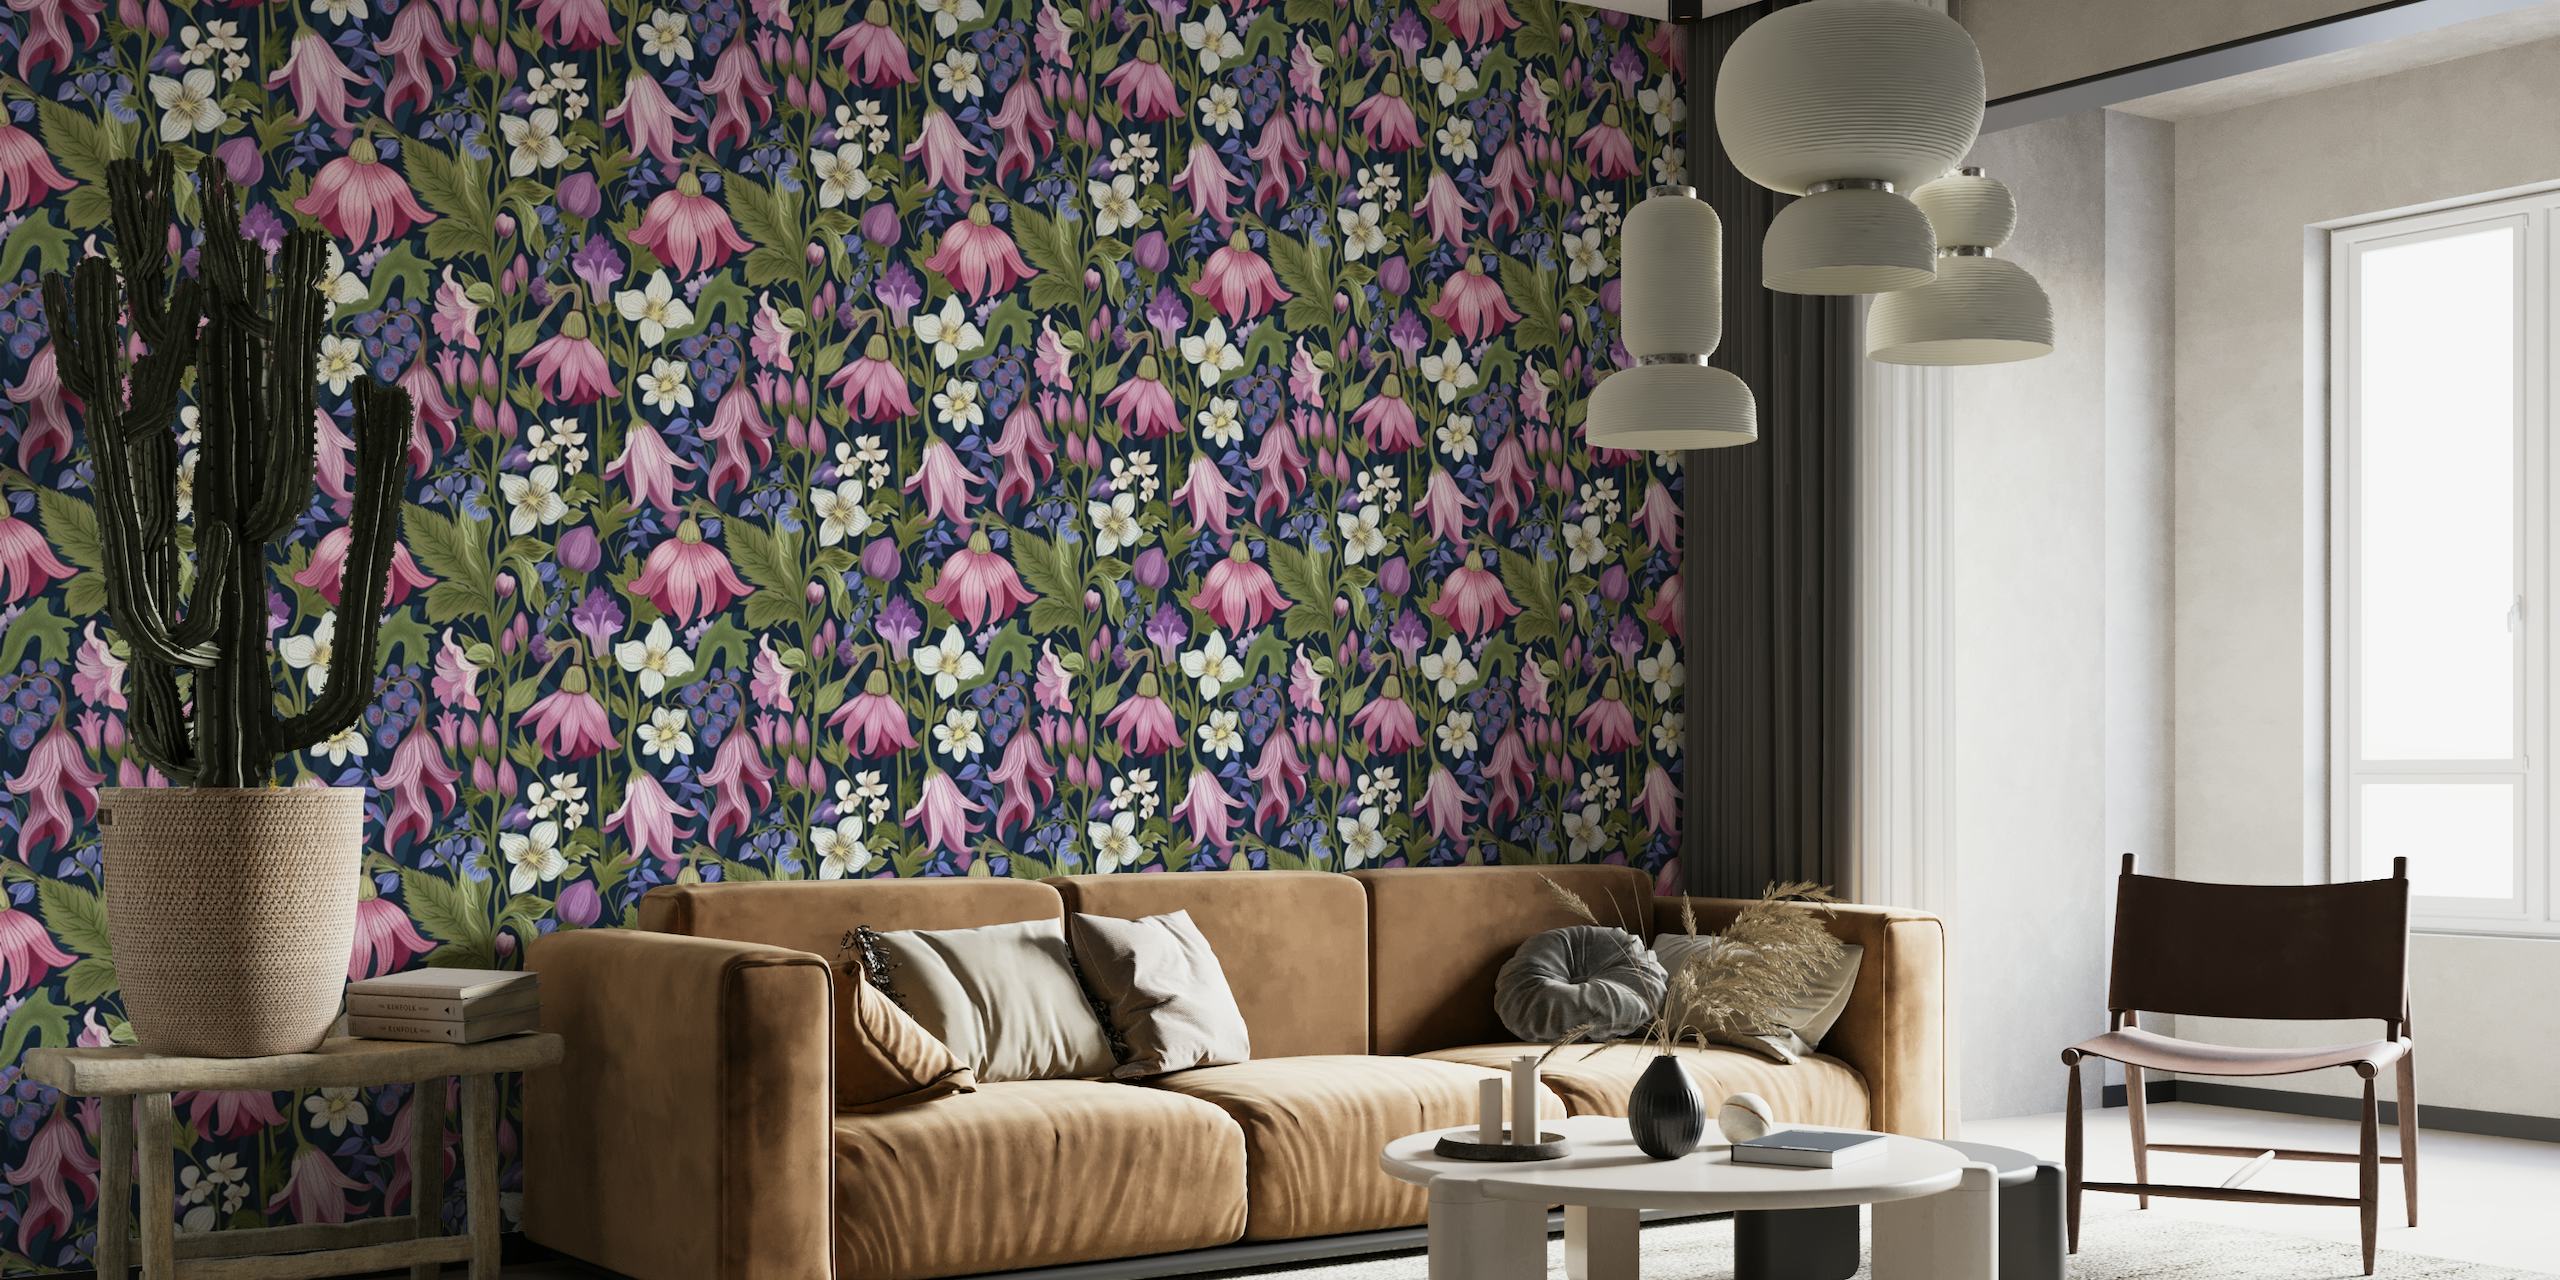 Elegant botanic wall mural with lush florals in pinks, purples, and whites on a deep blue background